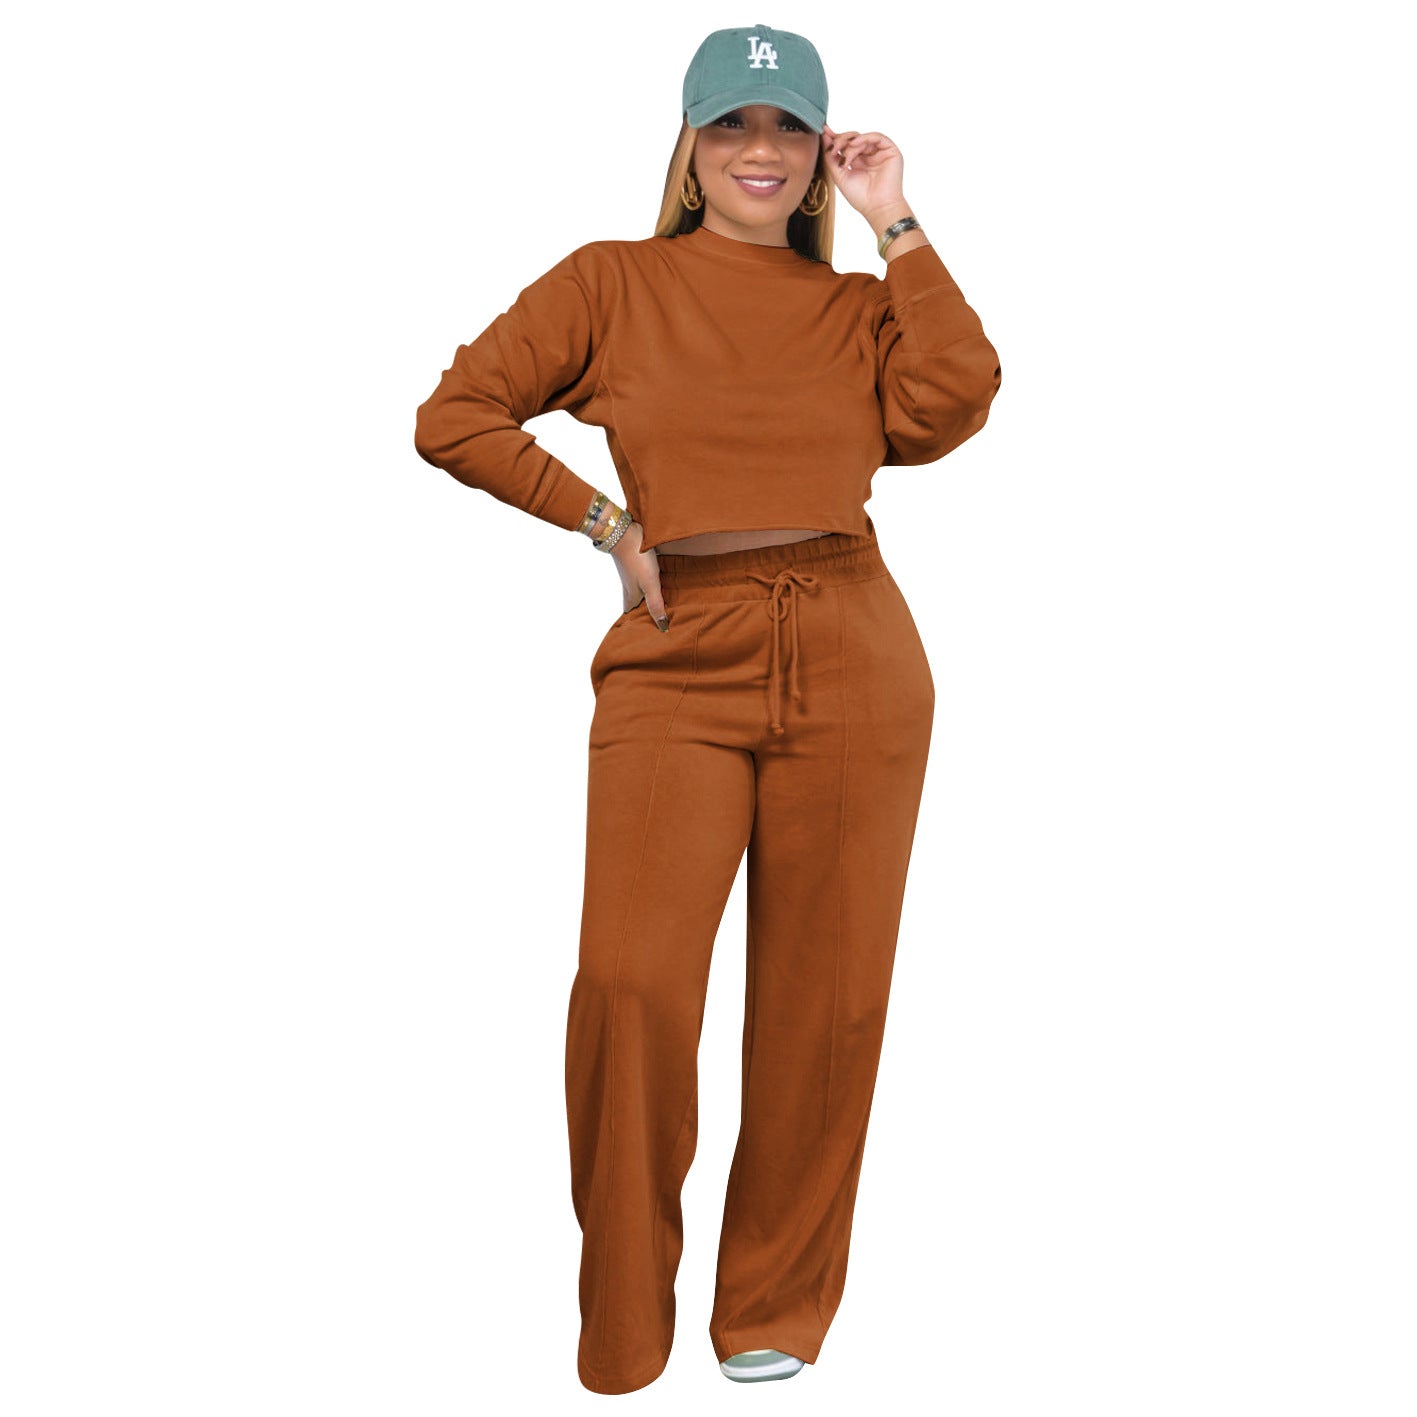 BamBam Women Solid Long Sleeve Top and Pant Casual Two-piece Set - BamBam